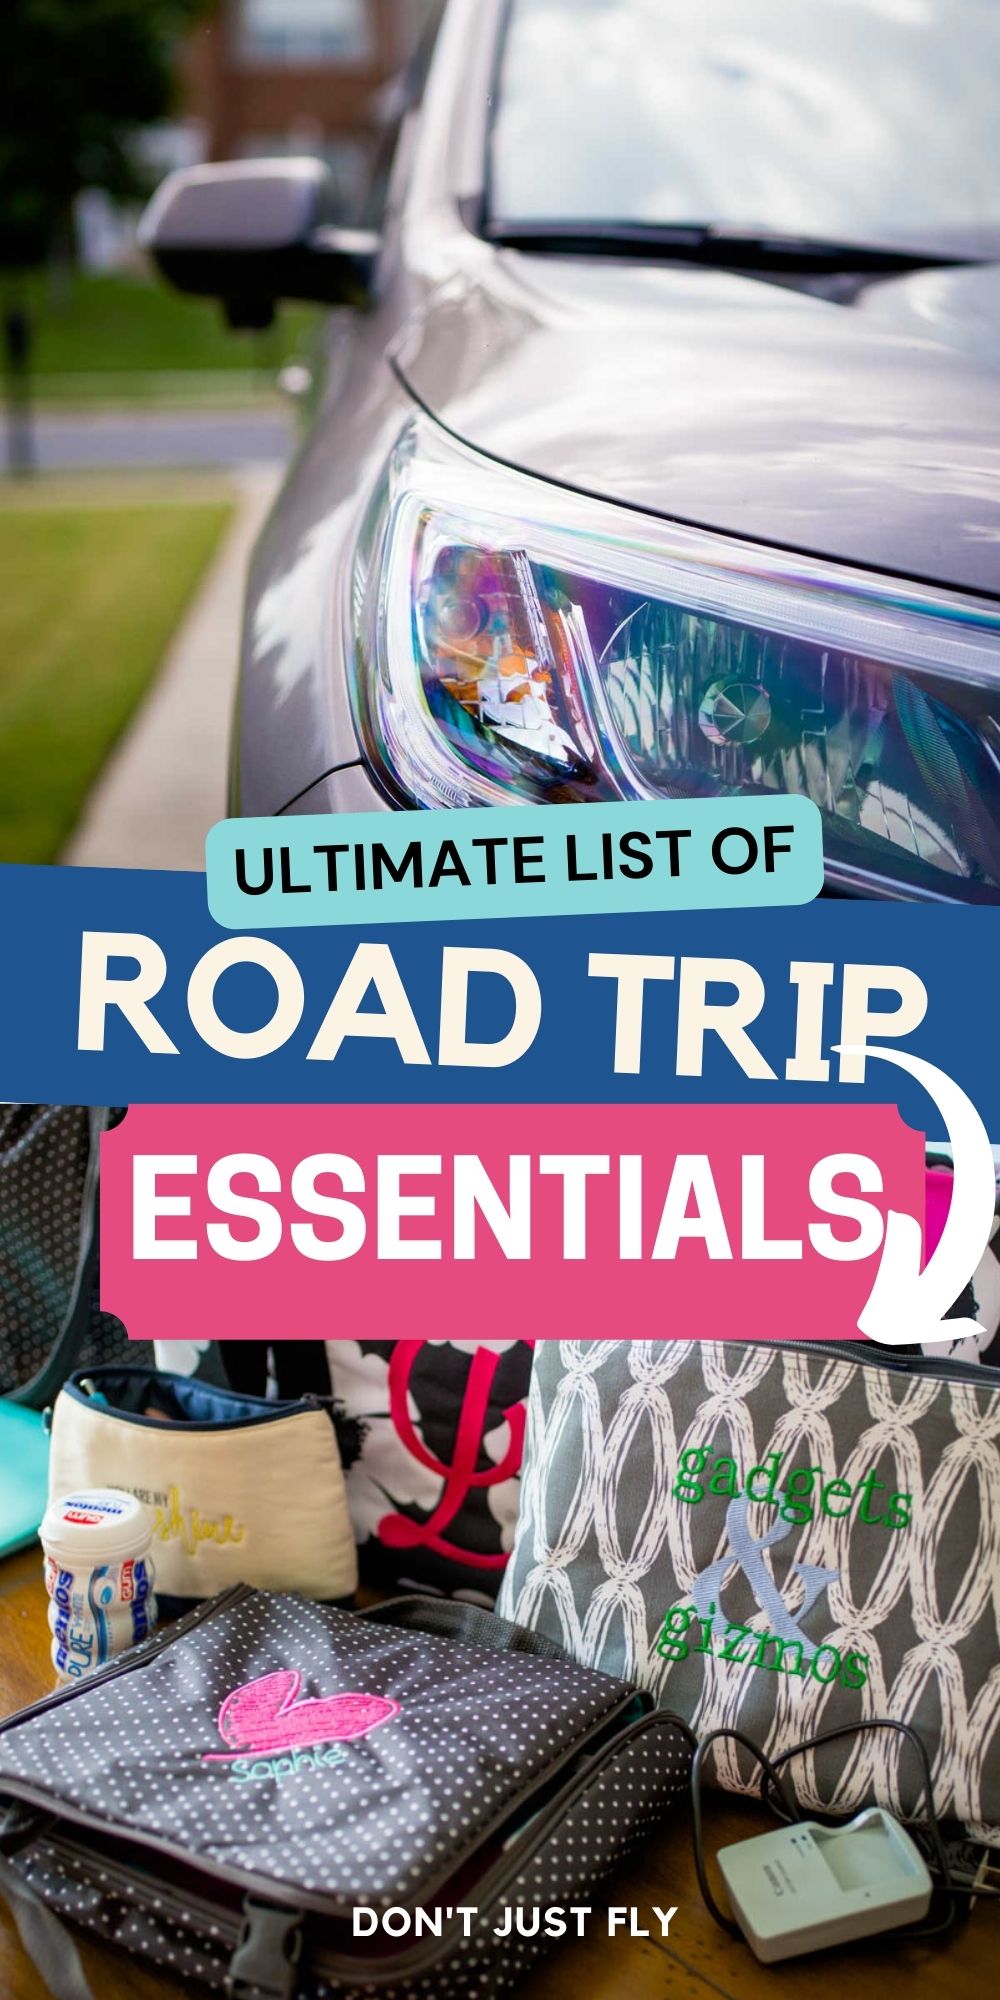 A photo collage shows a car and a pile of things to pack for a road trip.